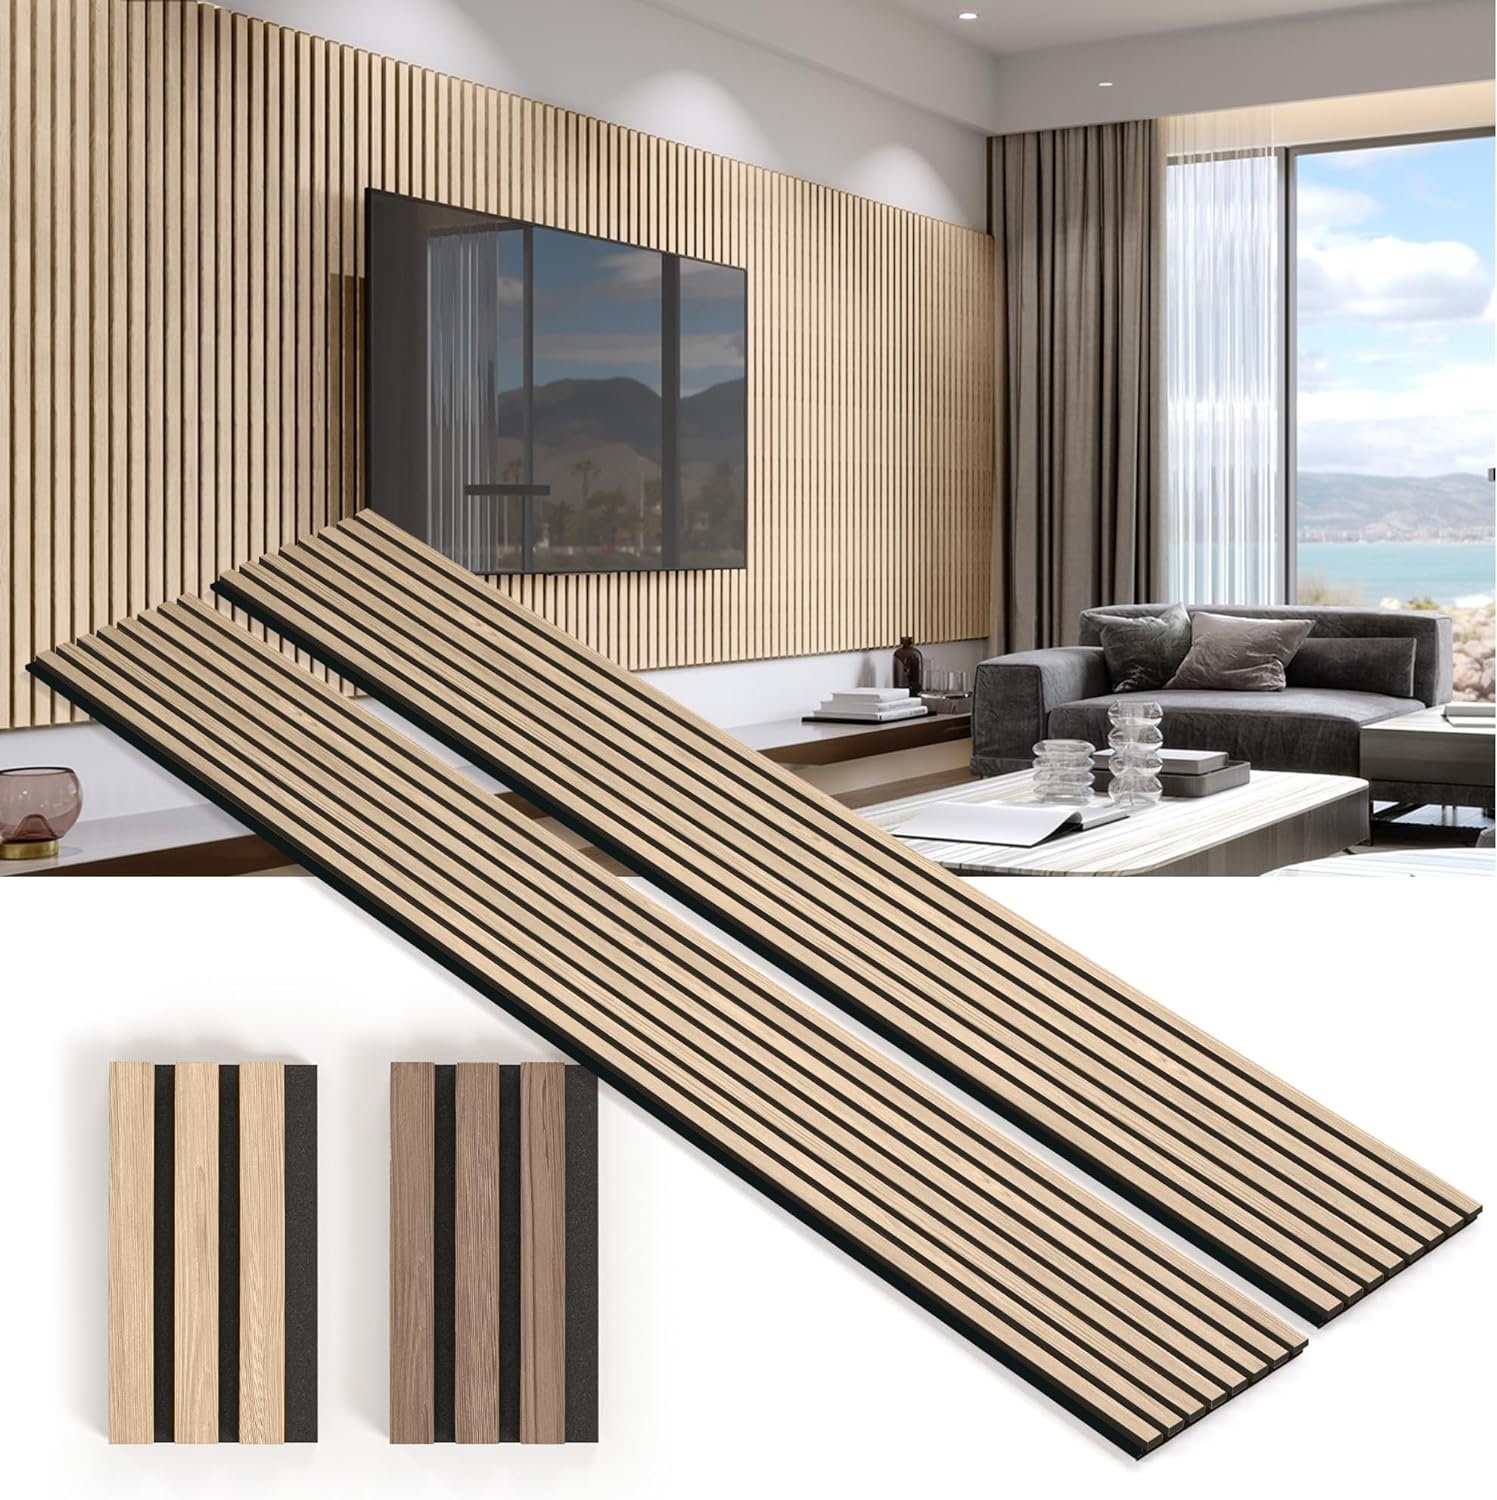 Woody Walls Acoustic Wood Wall Panels for Interior Wall Decor | Set of 2  Seamless Joint Wood Panels for Walls | DIY Wood Slat Wall | 3D Wall Panel